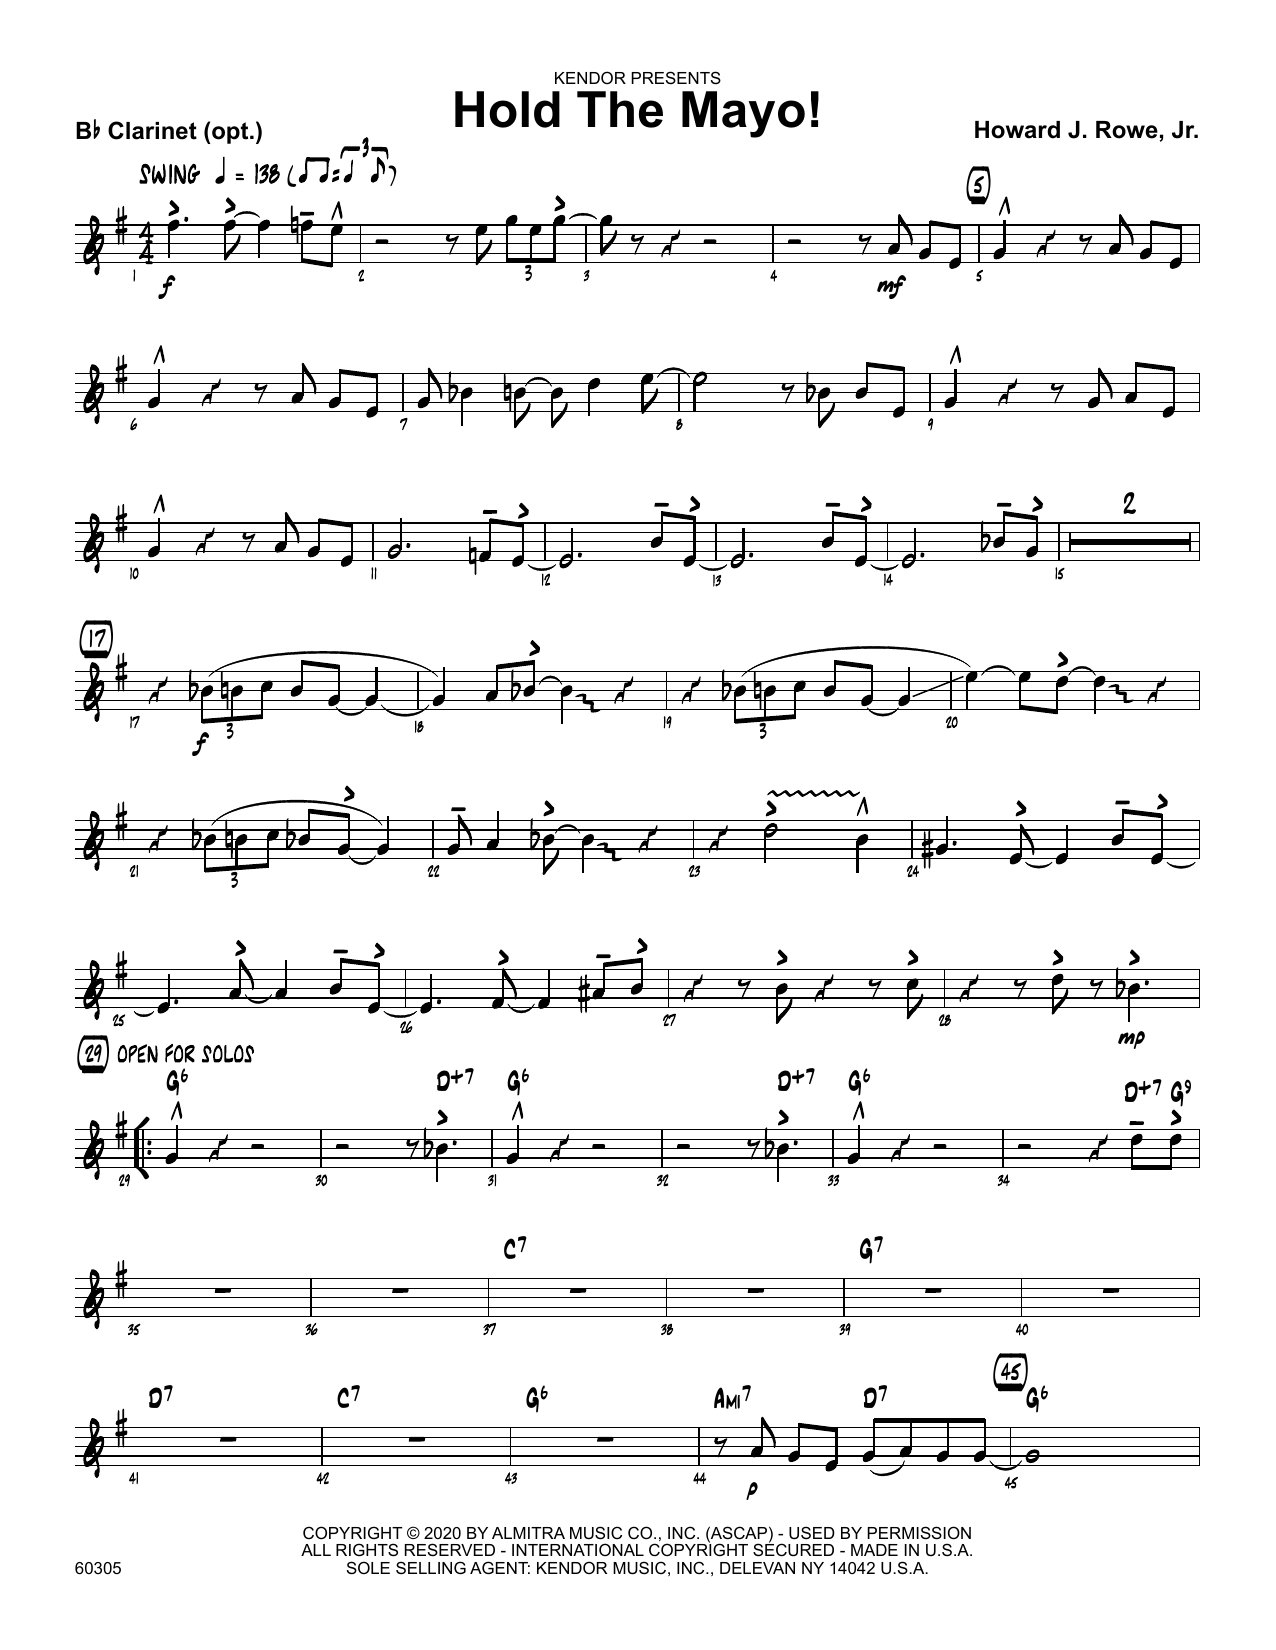 Download Howard Rowe Hold The Mayo! - Bb Clarinet Sheet Music